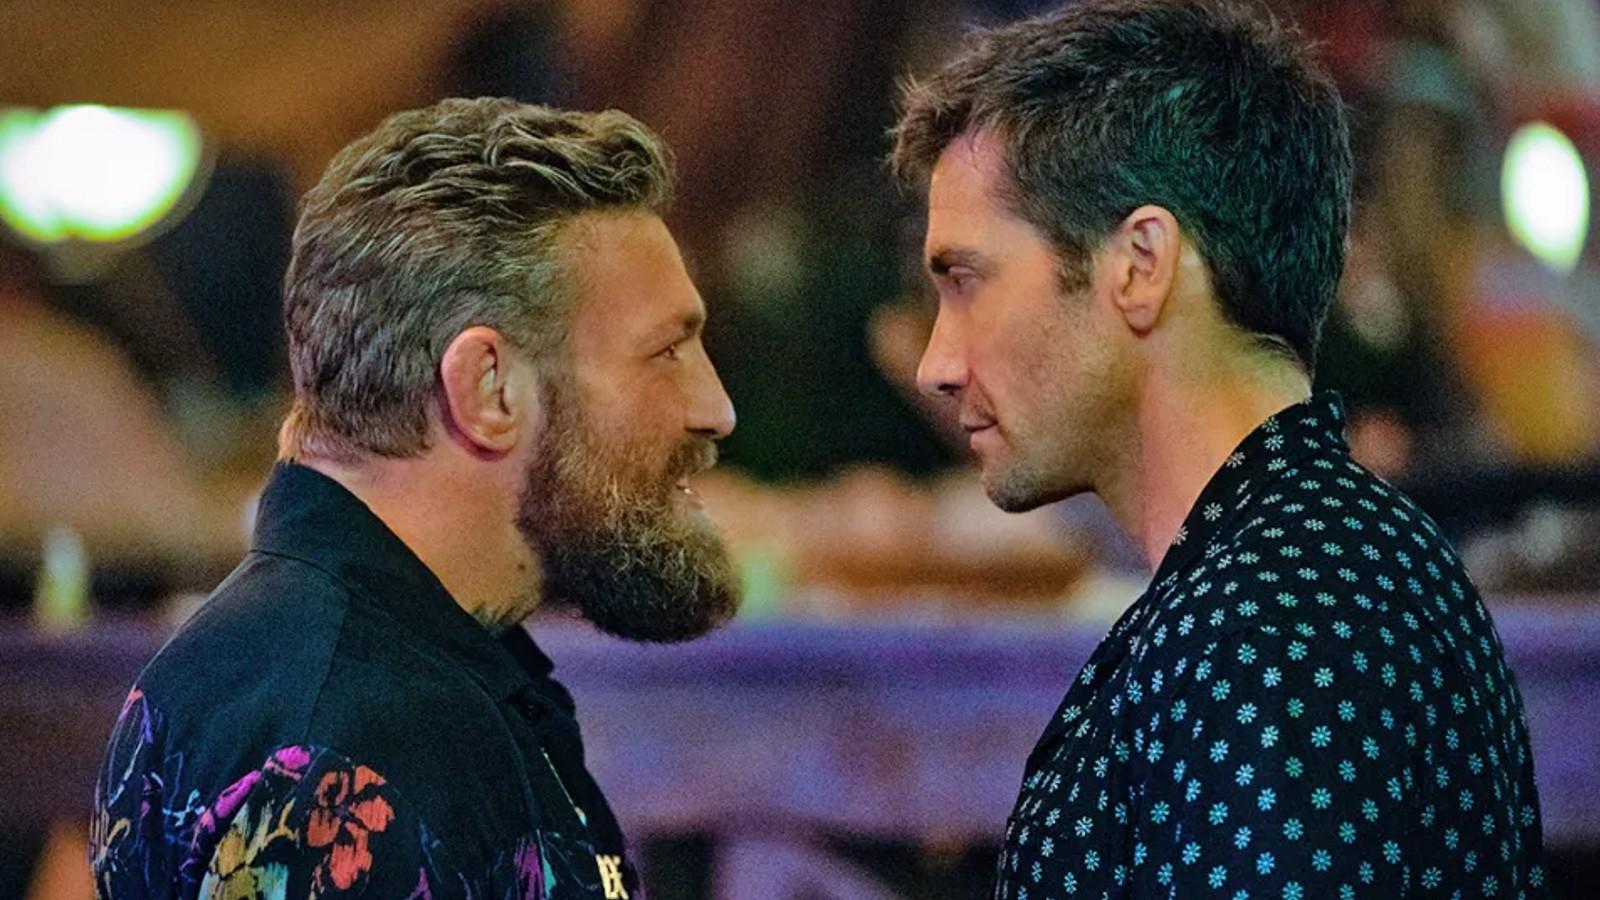 Conor McGregor and Jake Gyllenhaal face-to-face in Road House.